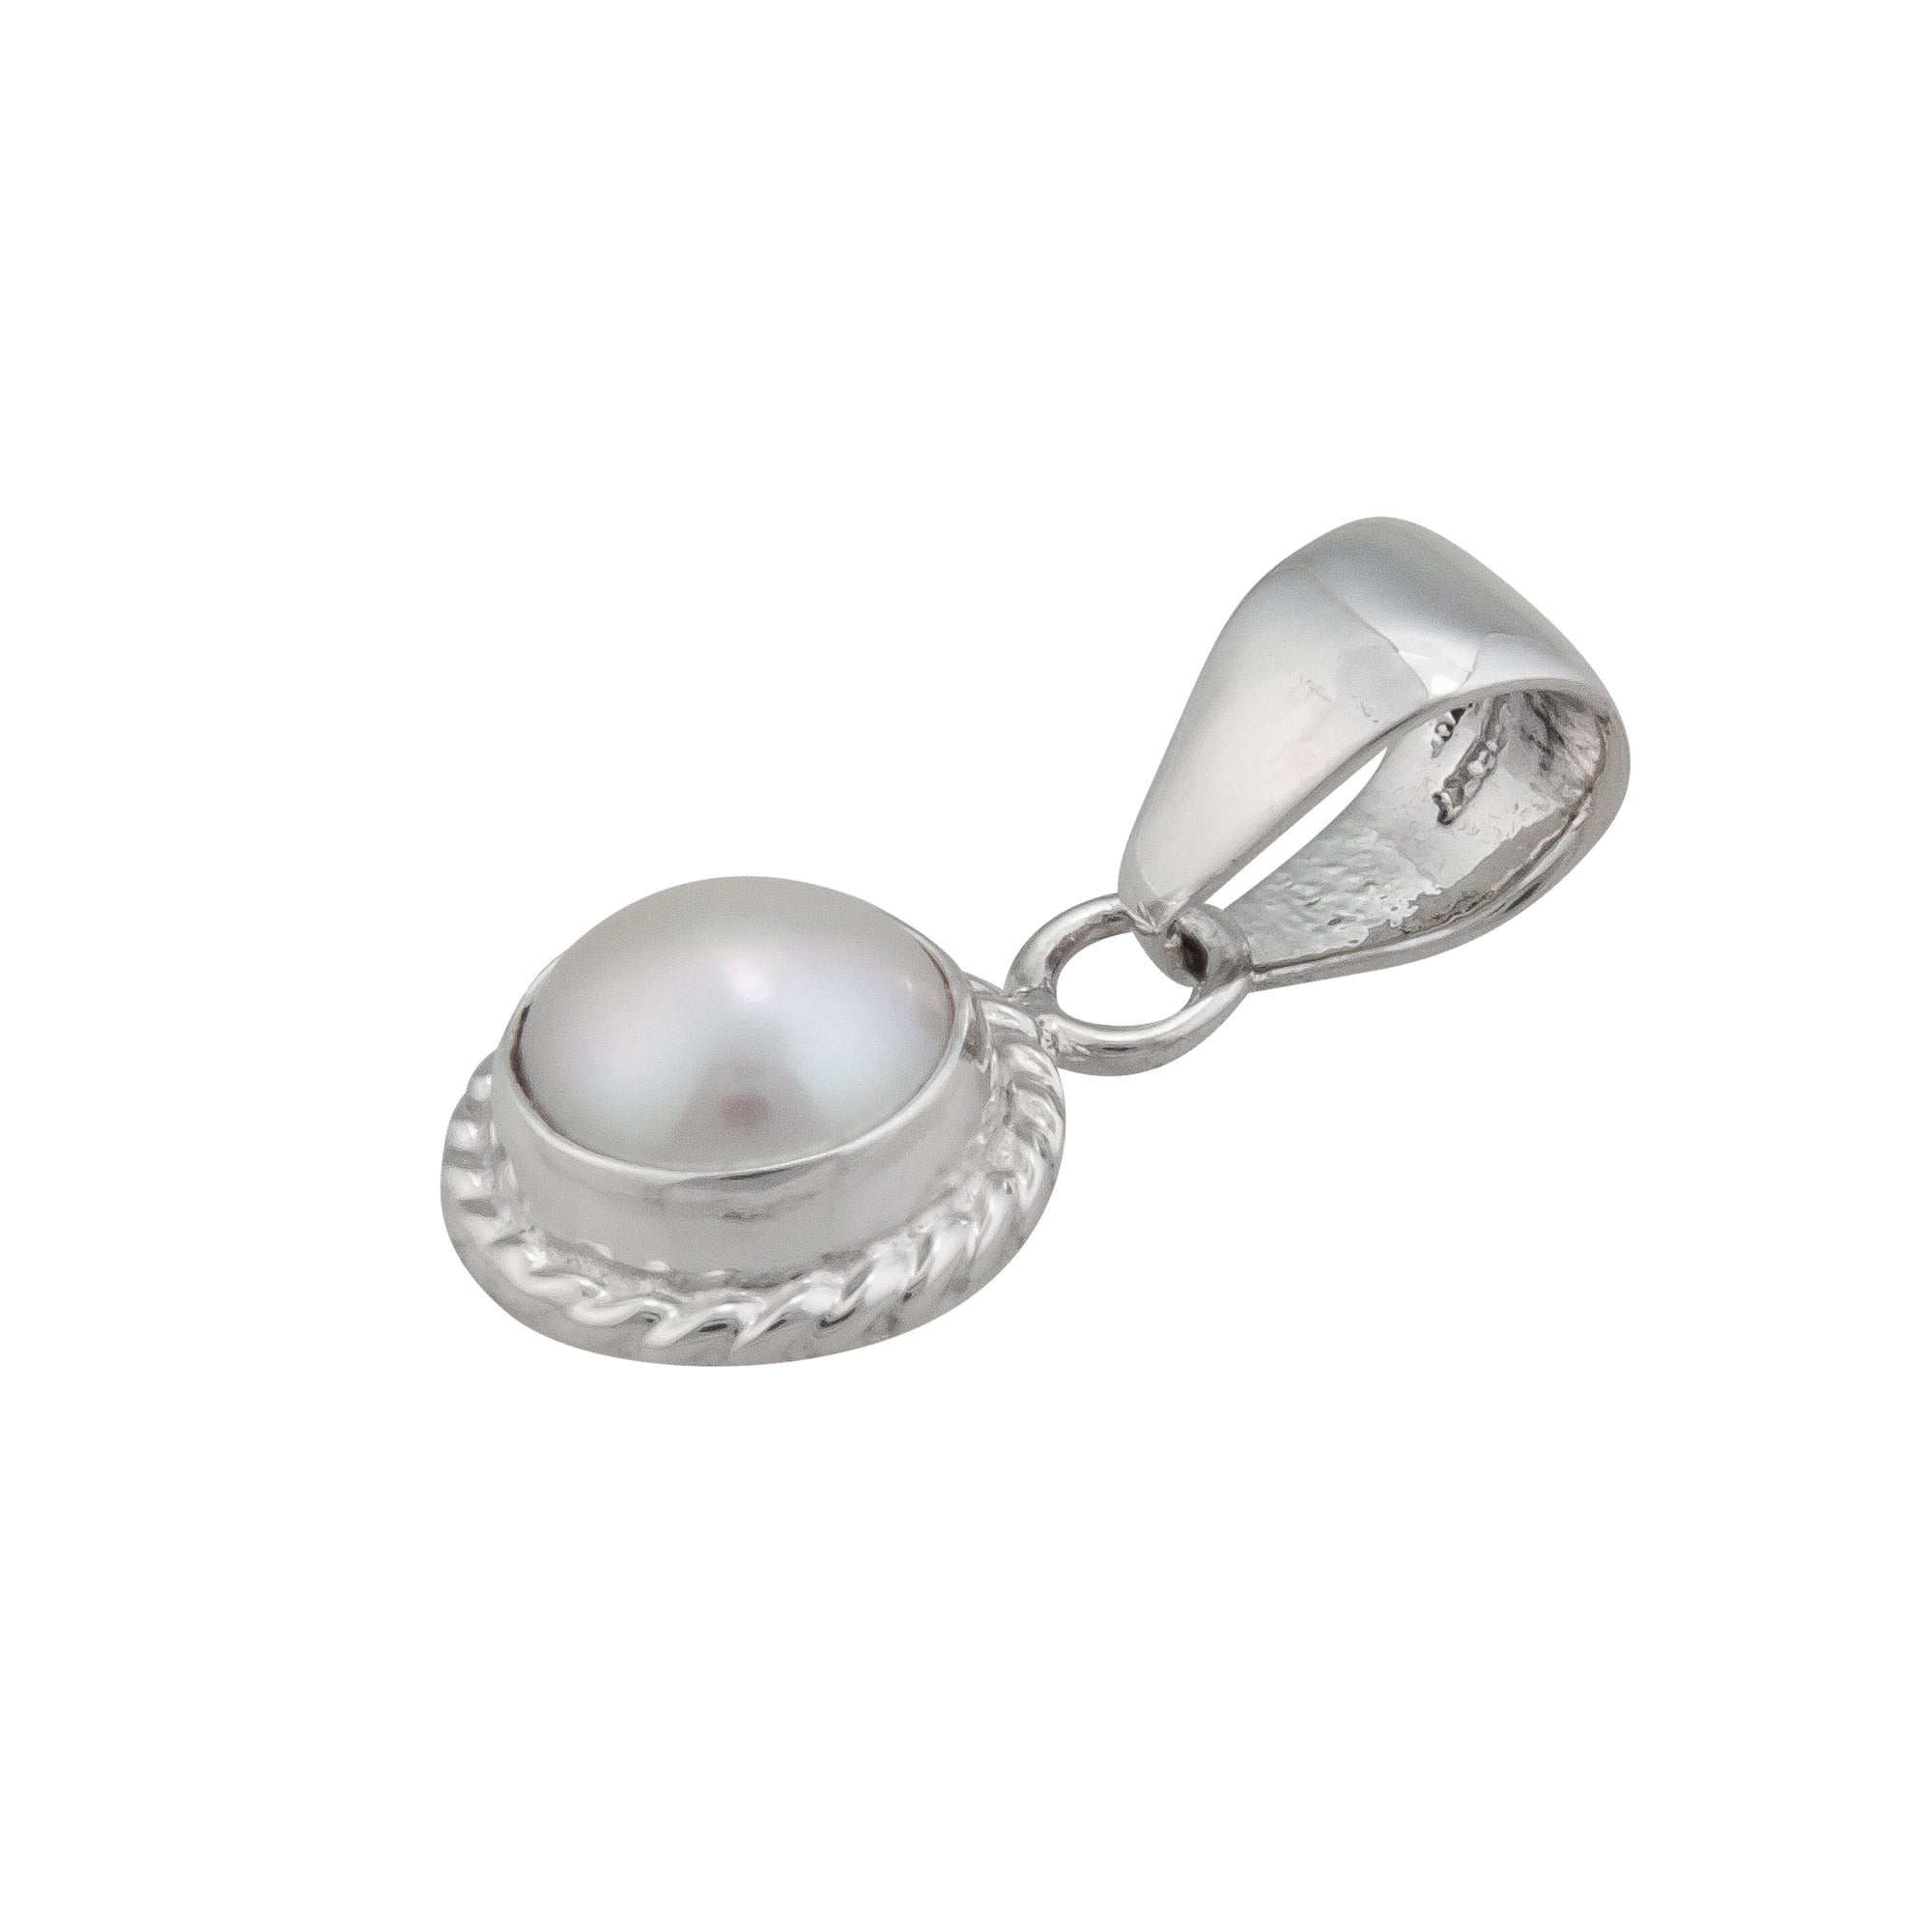 Charles Albert Jewelry - Sterling Silver White Pearl Rope Pendant - Side View